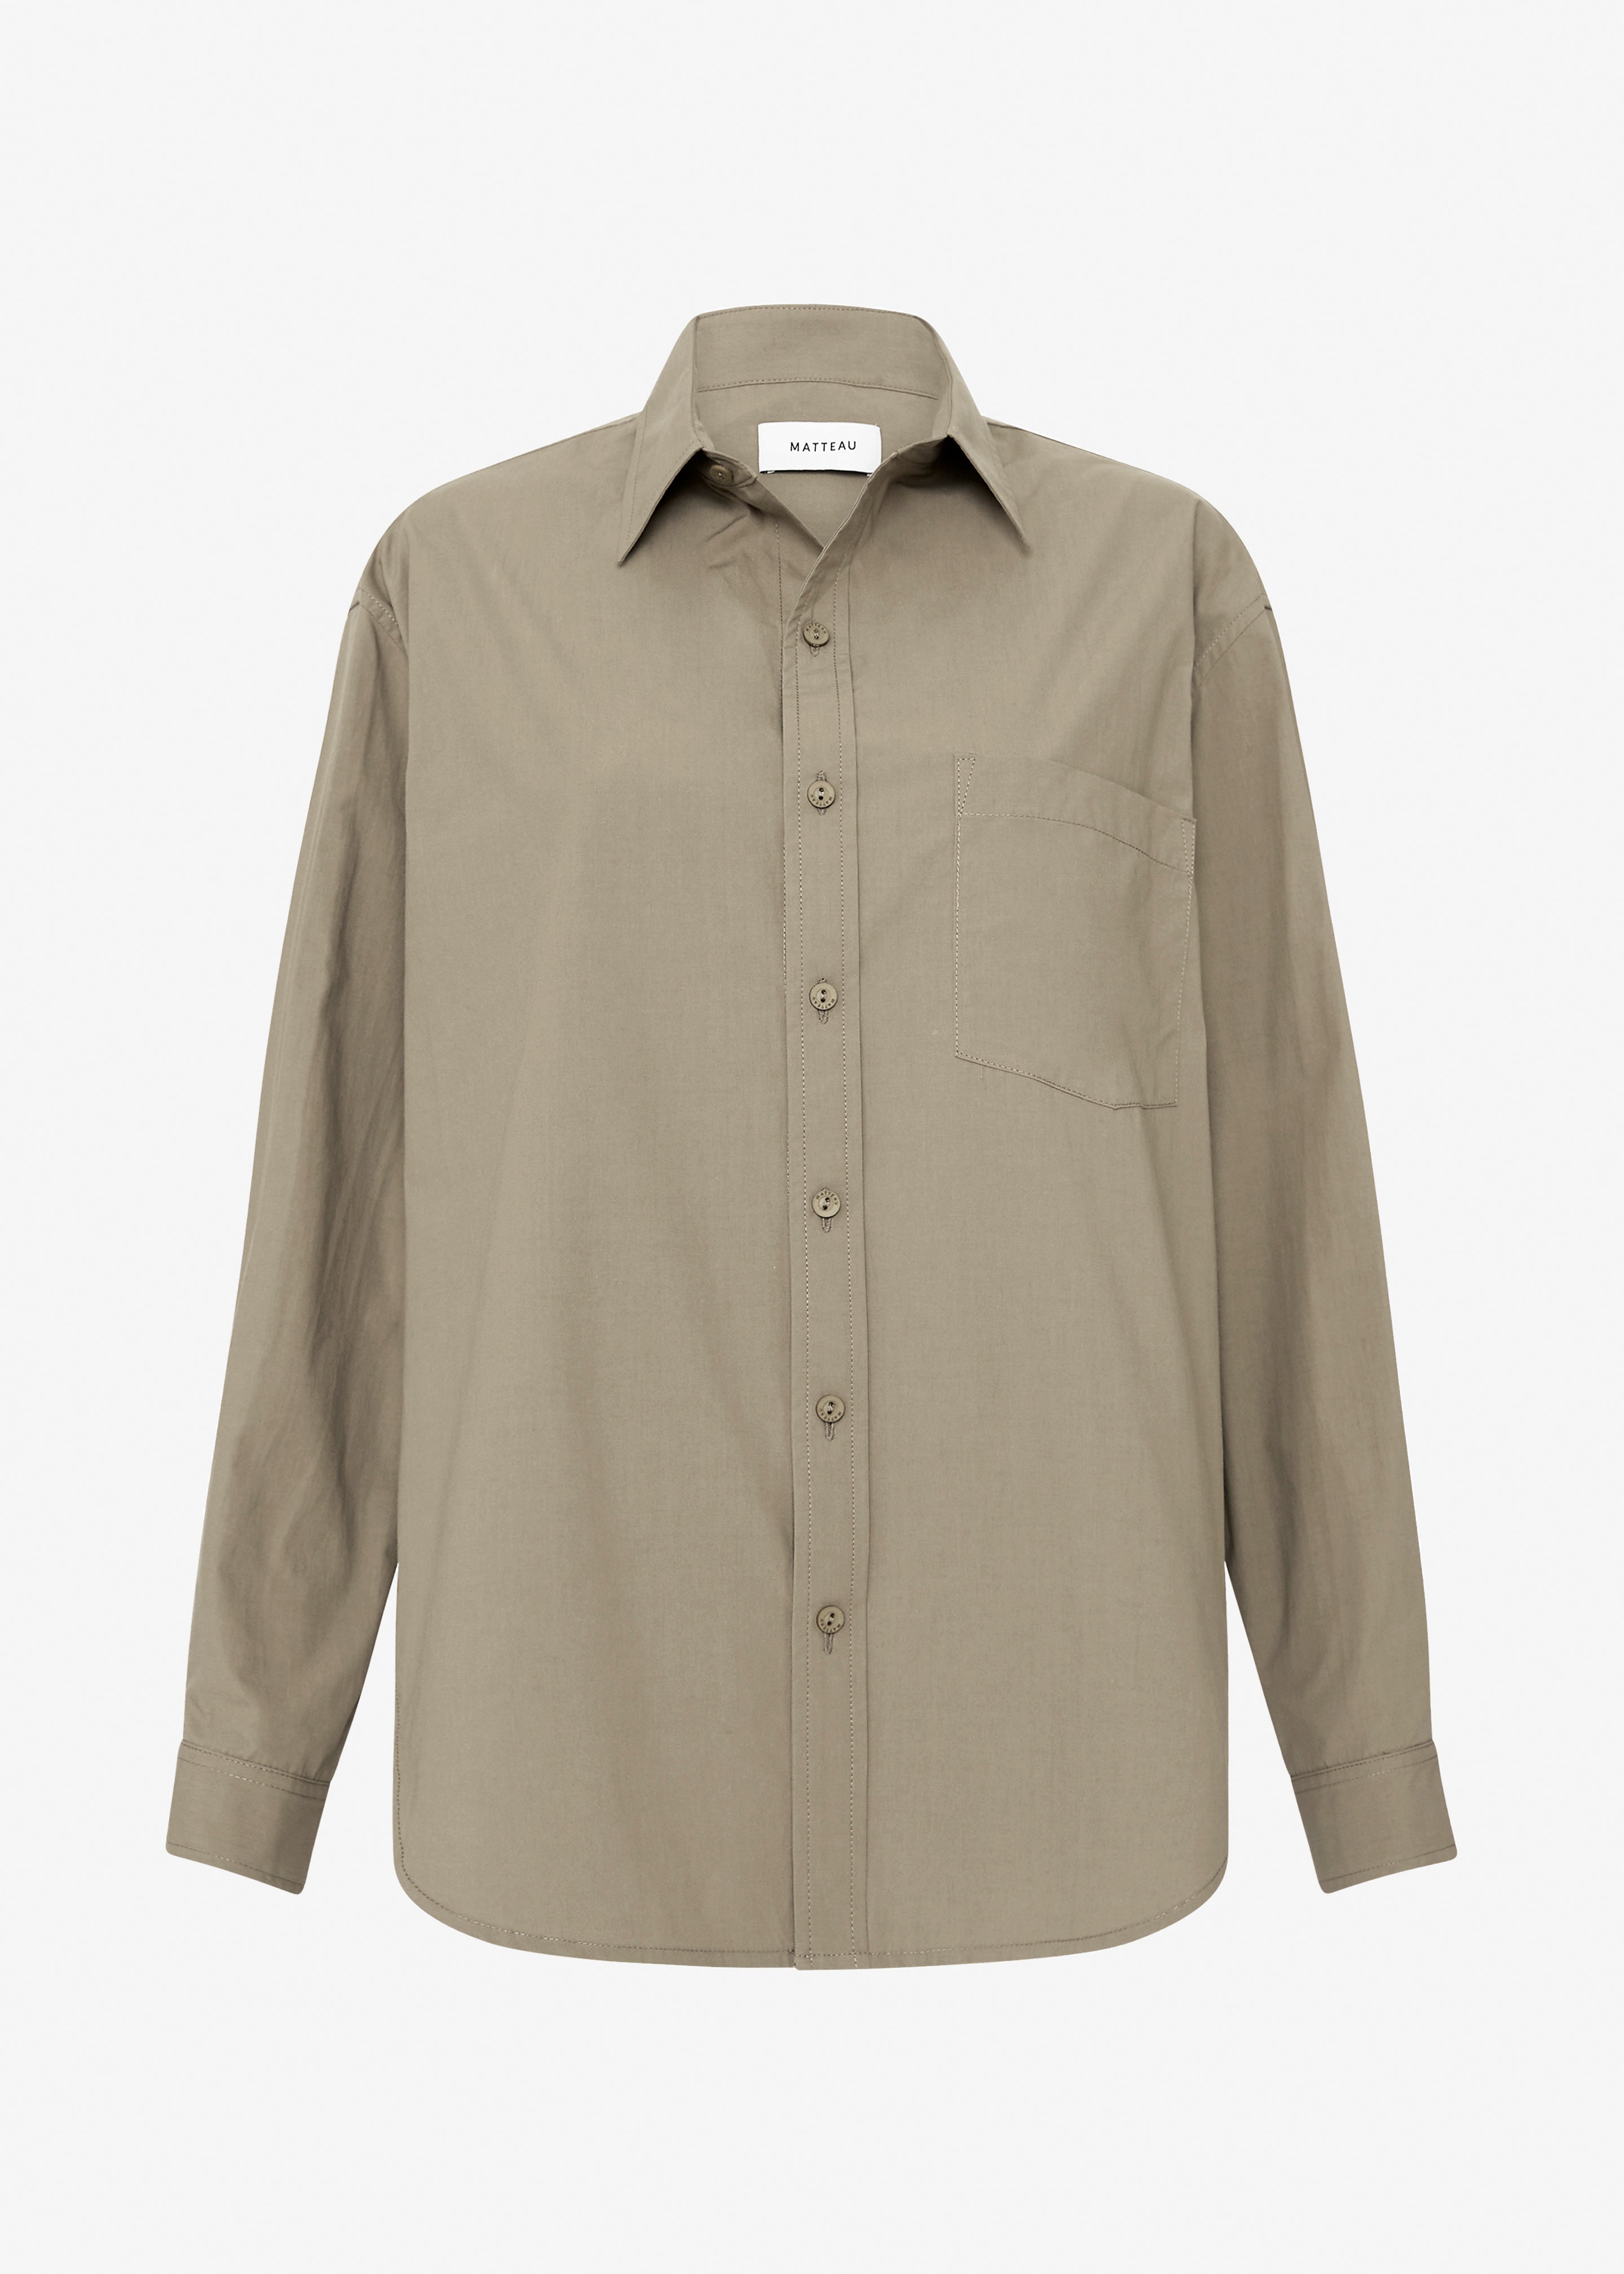 Matteau Relaxed Shirt - Taupe - 7